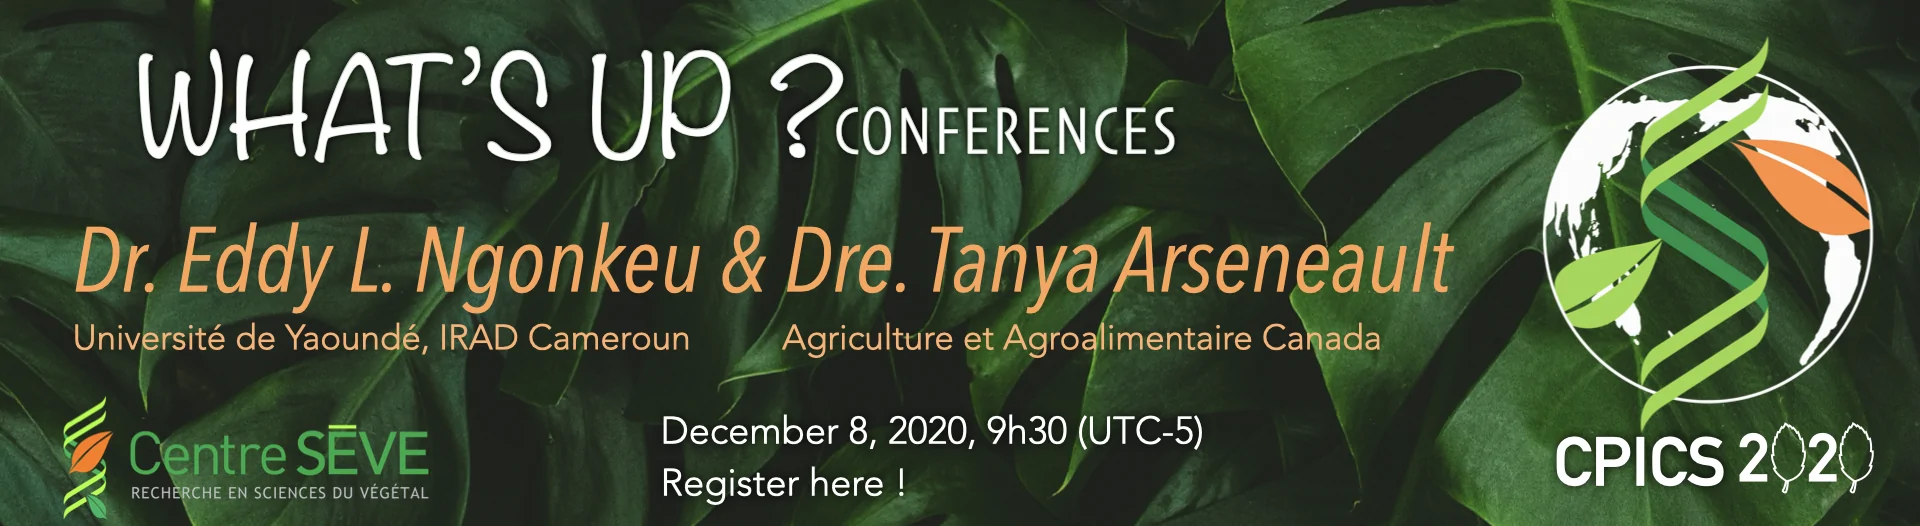 What's up conferences December 8<sup>th</sup> at 9h30 am with Dr. Eddy L. Ngonkeu from Université de Yaoundé and Dr. Tanya Arseneault from Agriculture and Agri-Food Canada